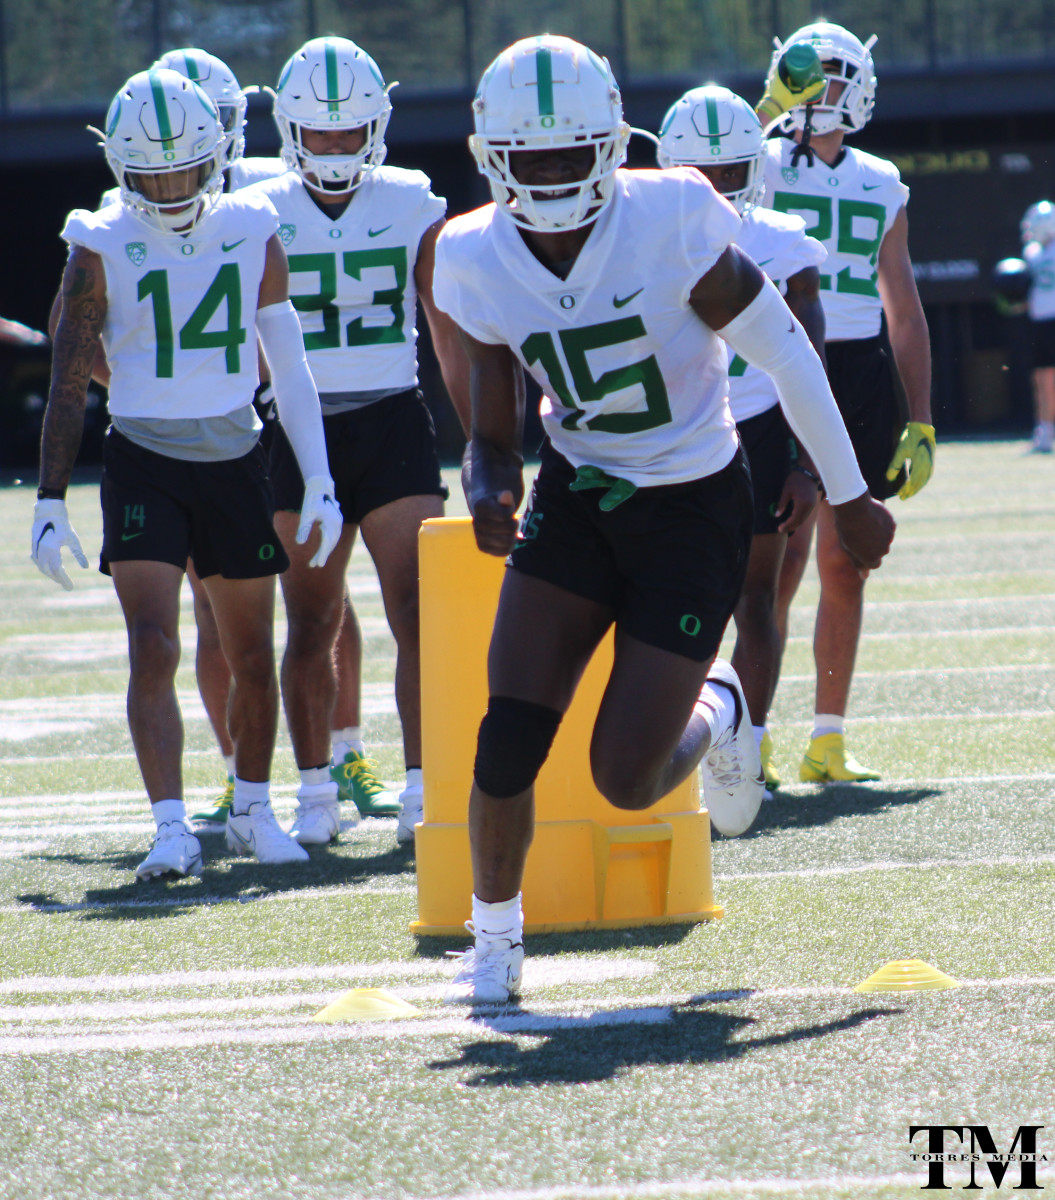 Brevard goes through wide receiver release drills at Oregon fall camp.